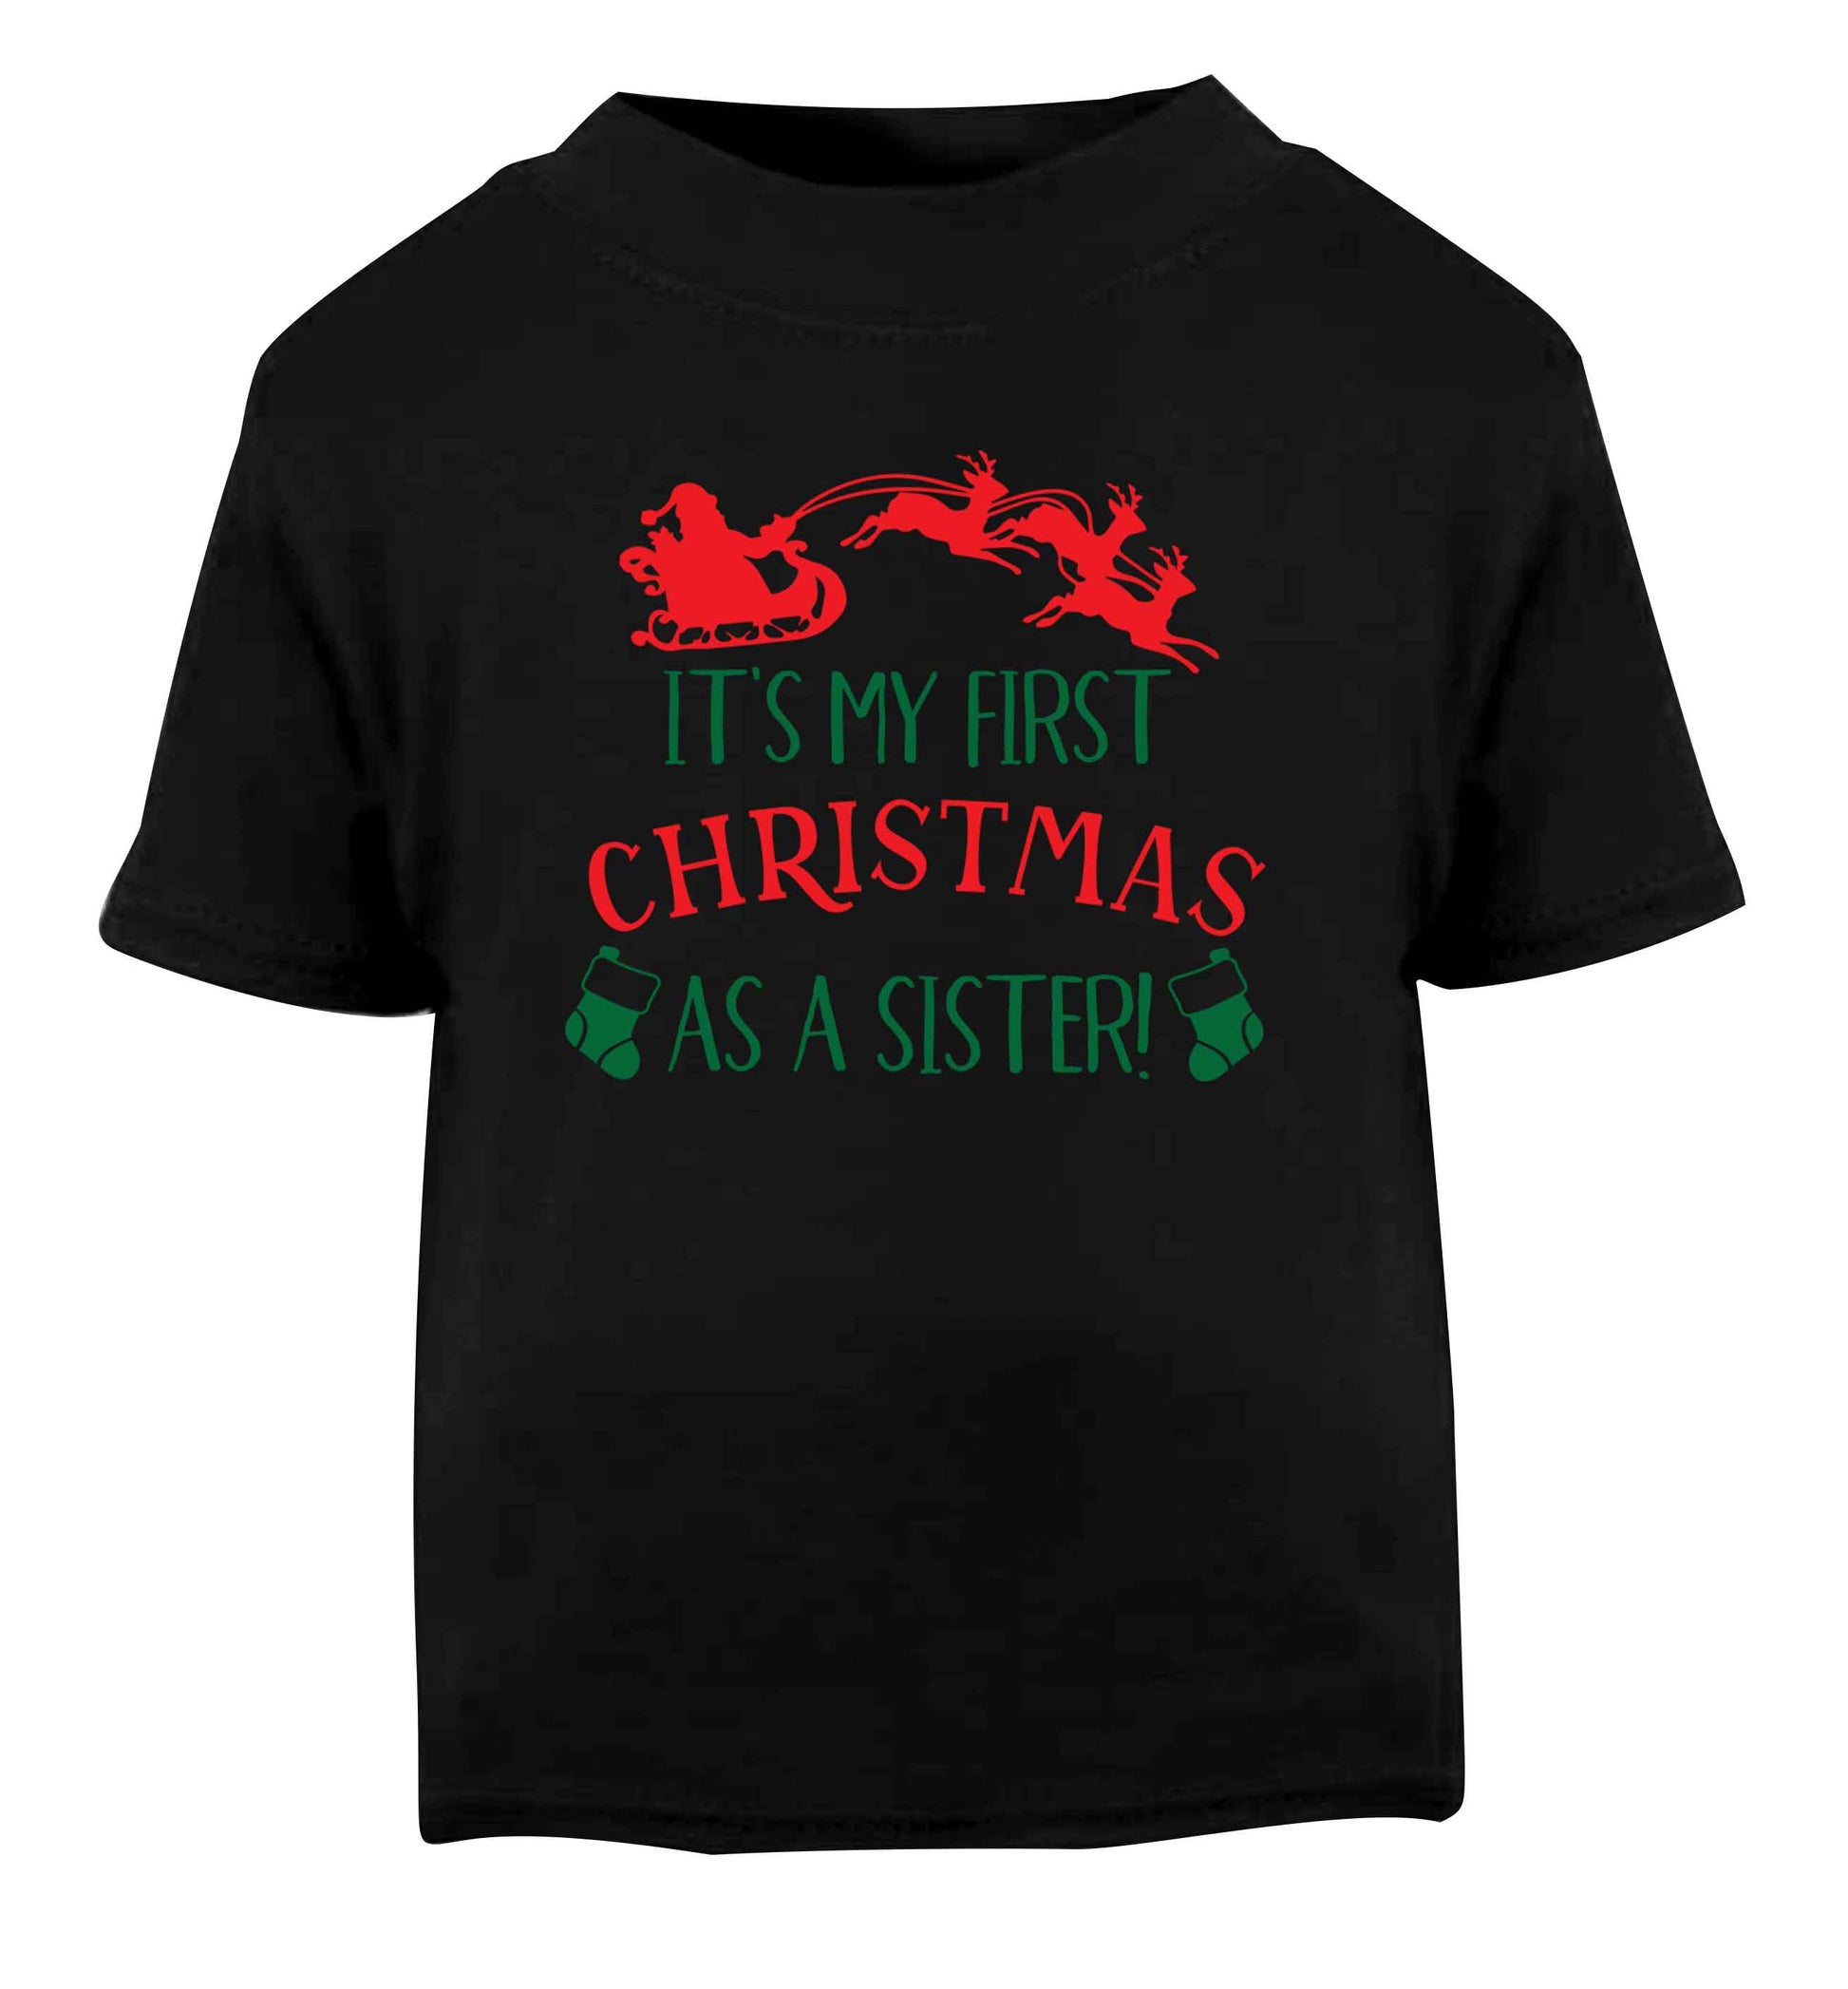 It's my first Christmas as a sister! Black Baby Toddler Tshirt 2 years